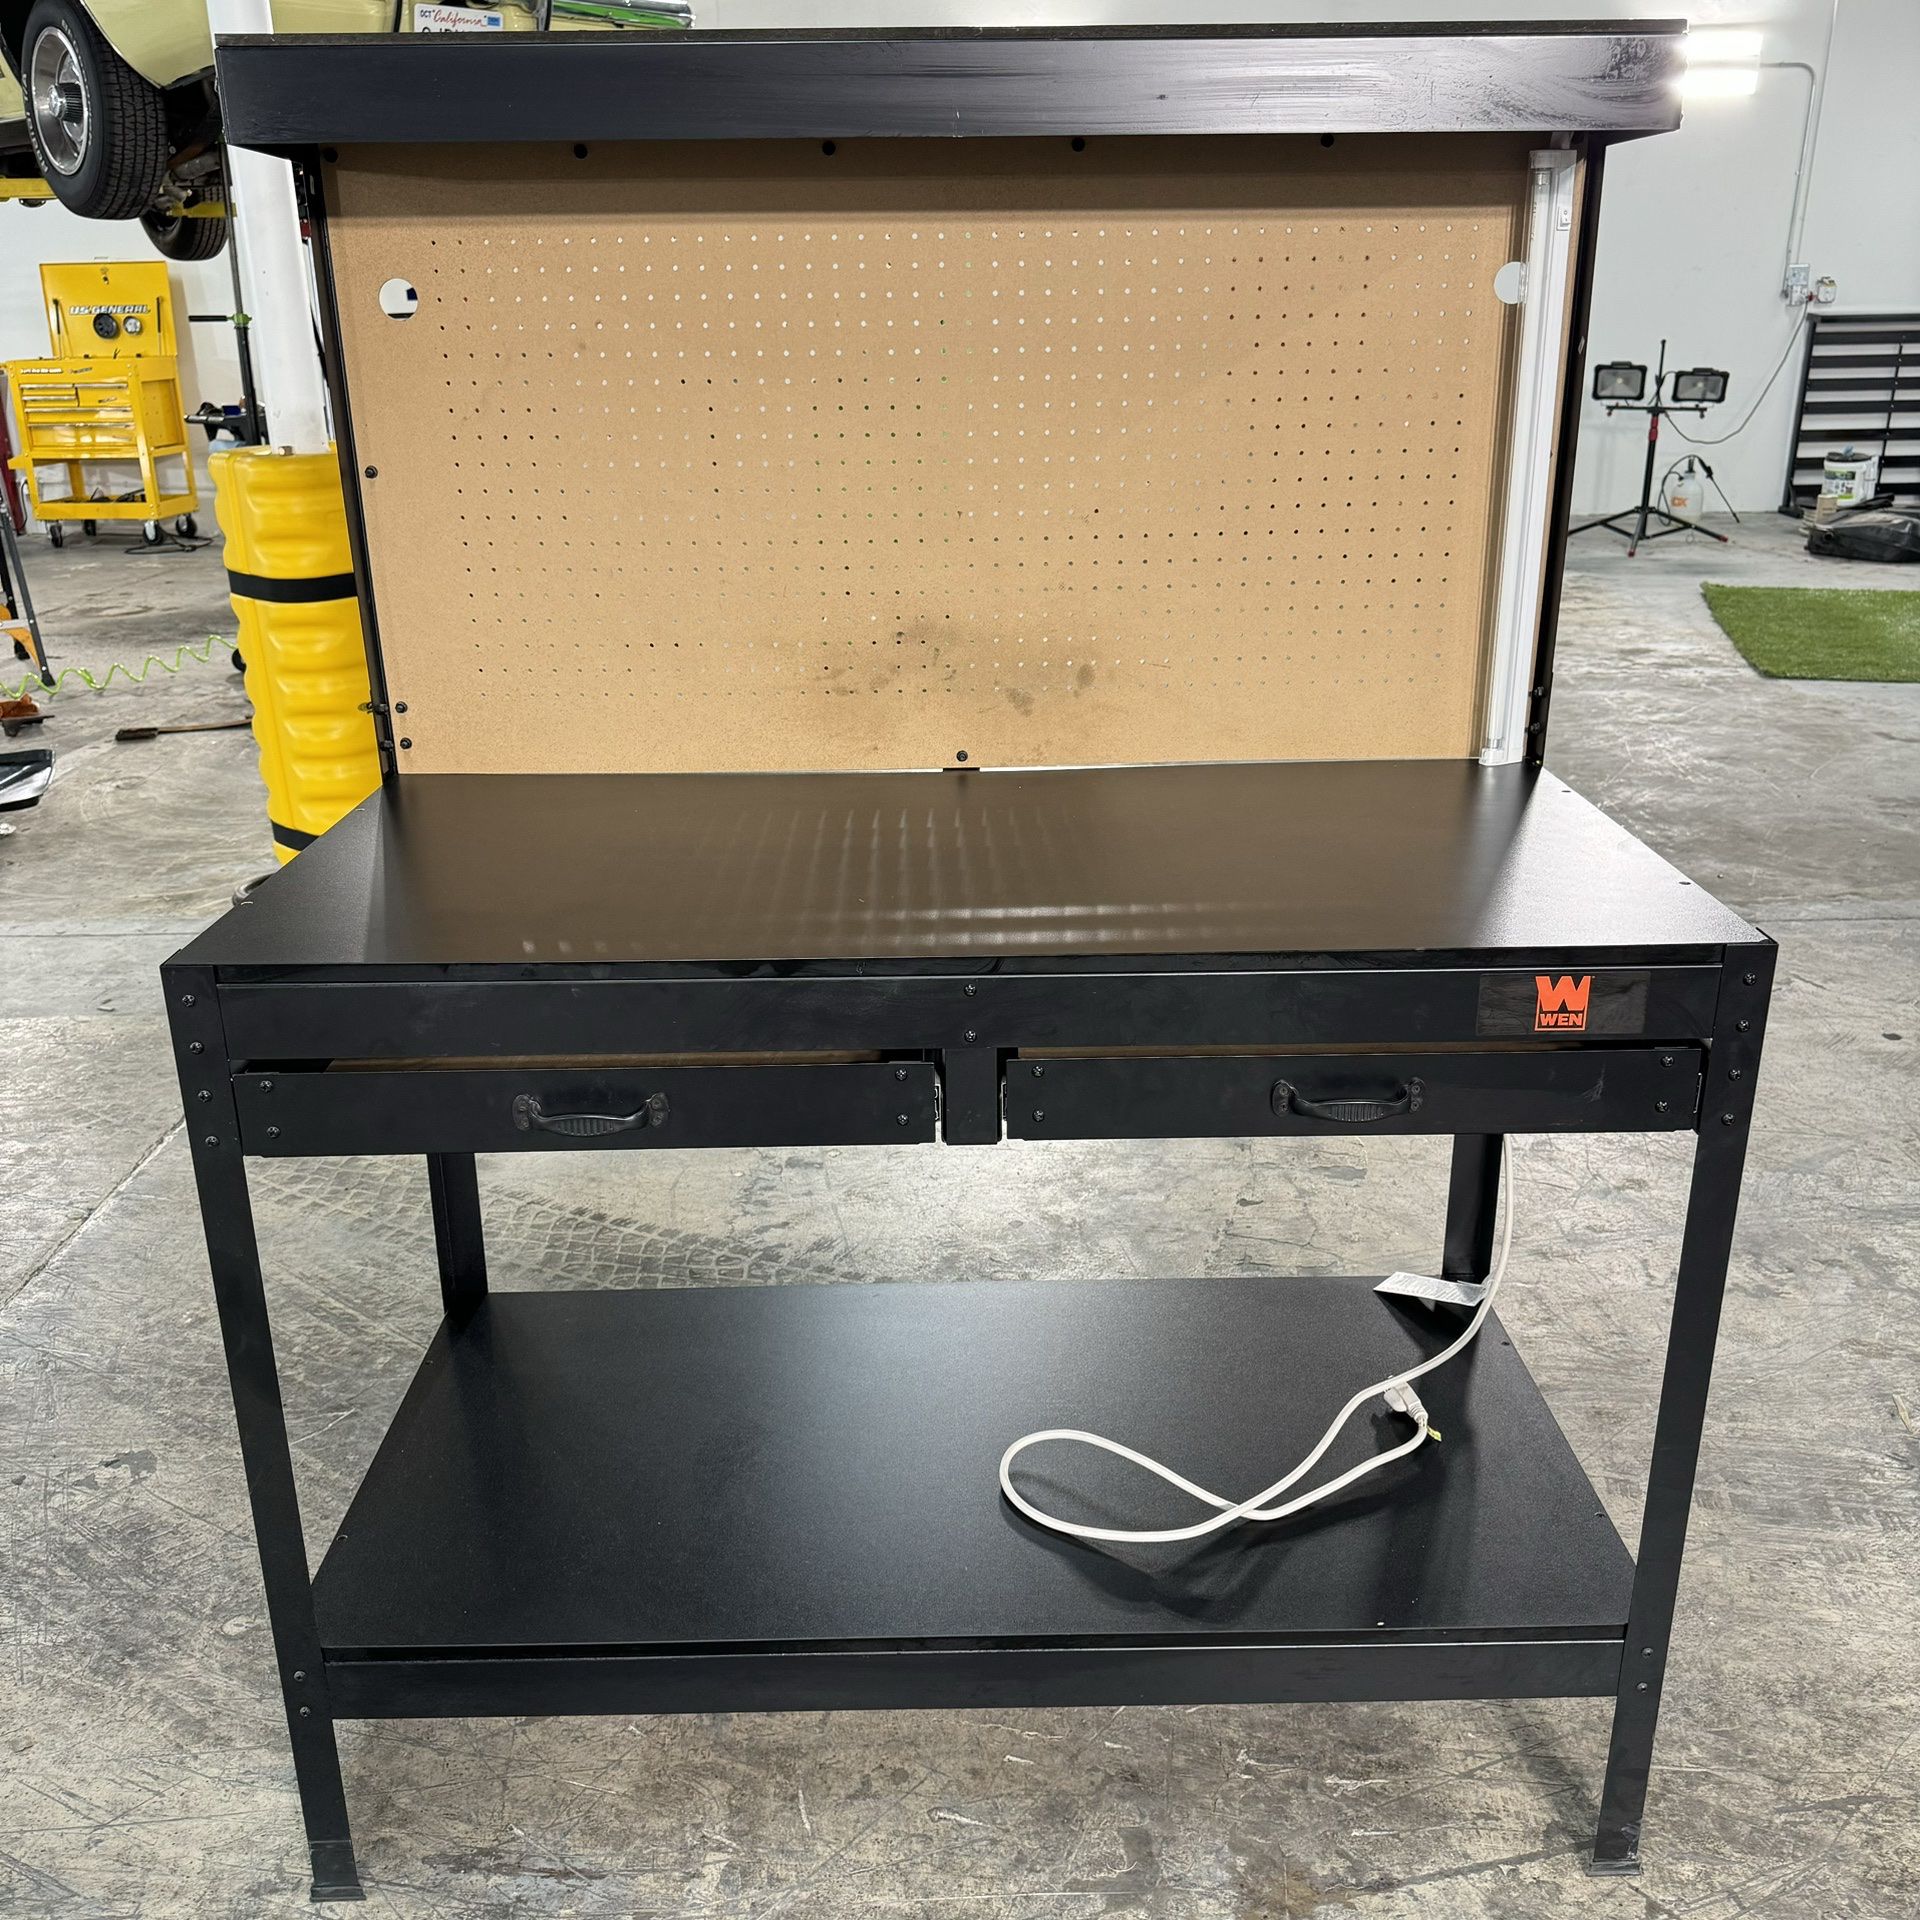 Wen 48” Freestanding Workbench, Power Outlets And Light